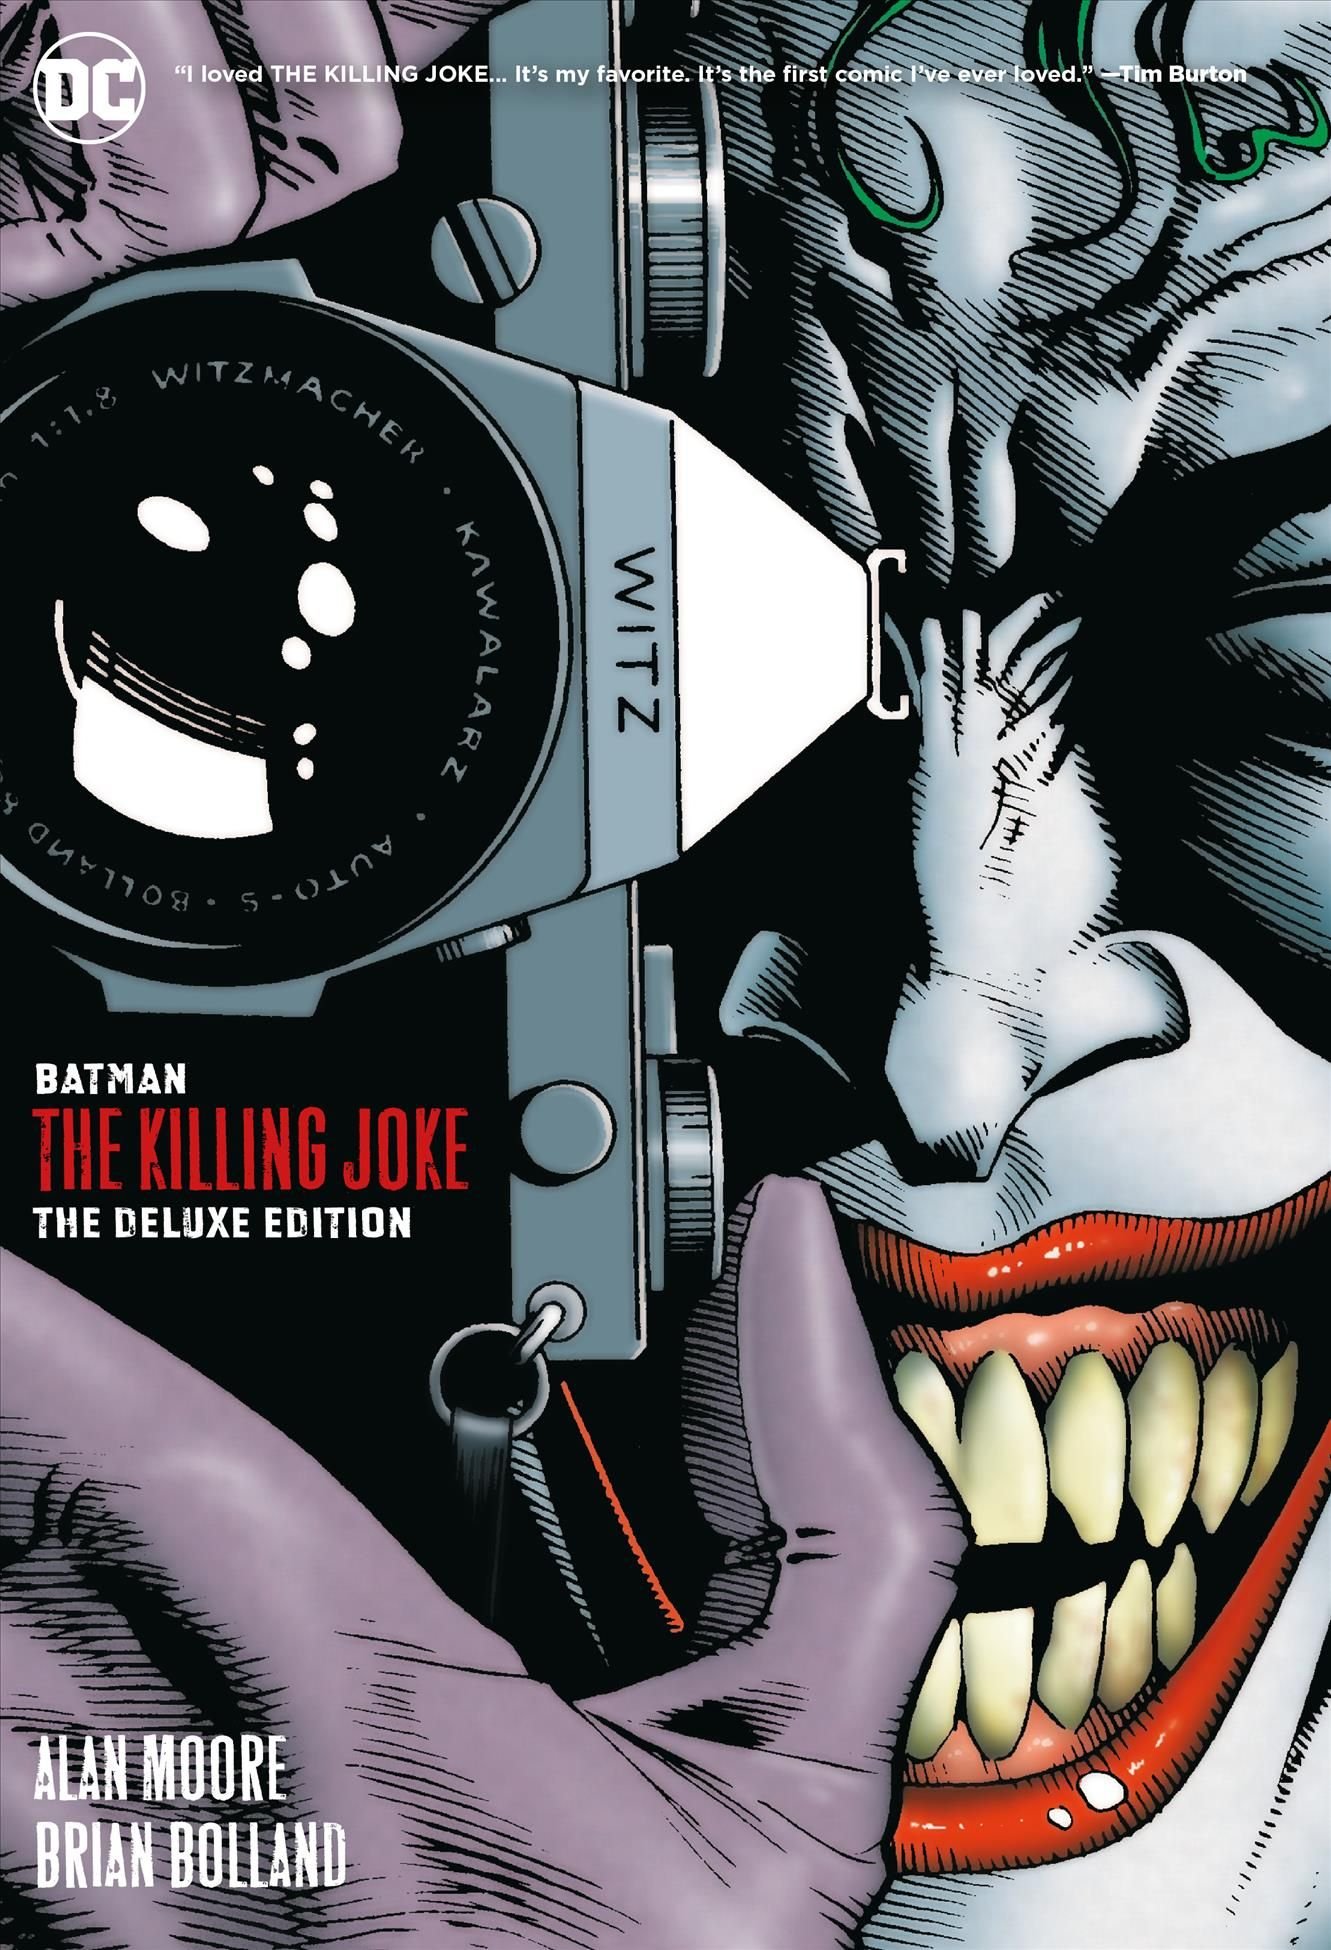 Buy Batman: The Killing Joke Deluxe: DC Black Label Edition by Alan Moore  With Free Delivery 